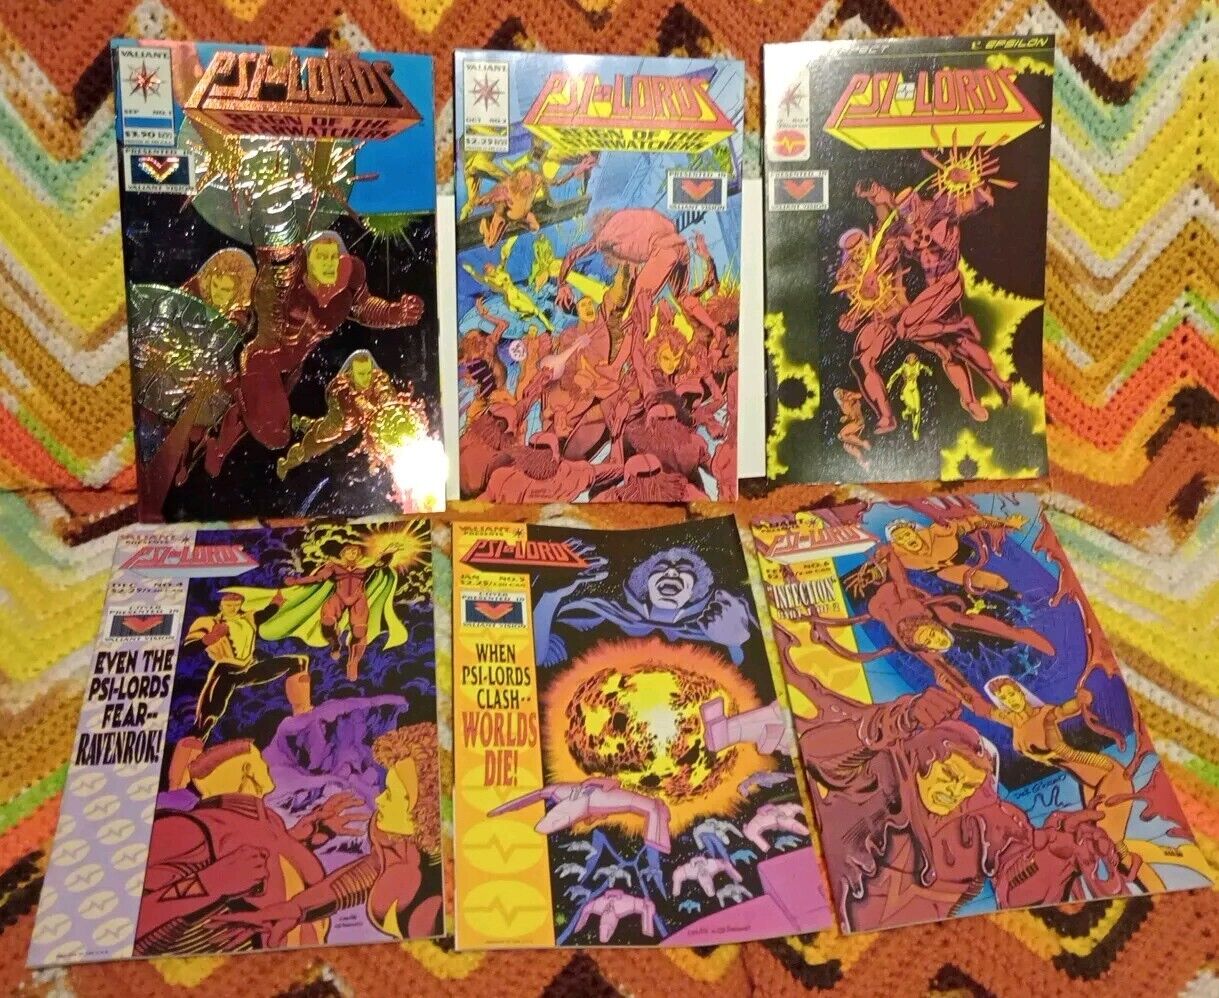 1994 Valiant Comics PSI-LORDS reign of the Star Watchers, No.1-6 #1 Chrome Cover